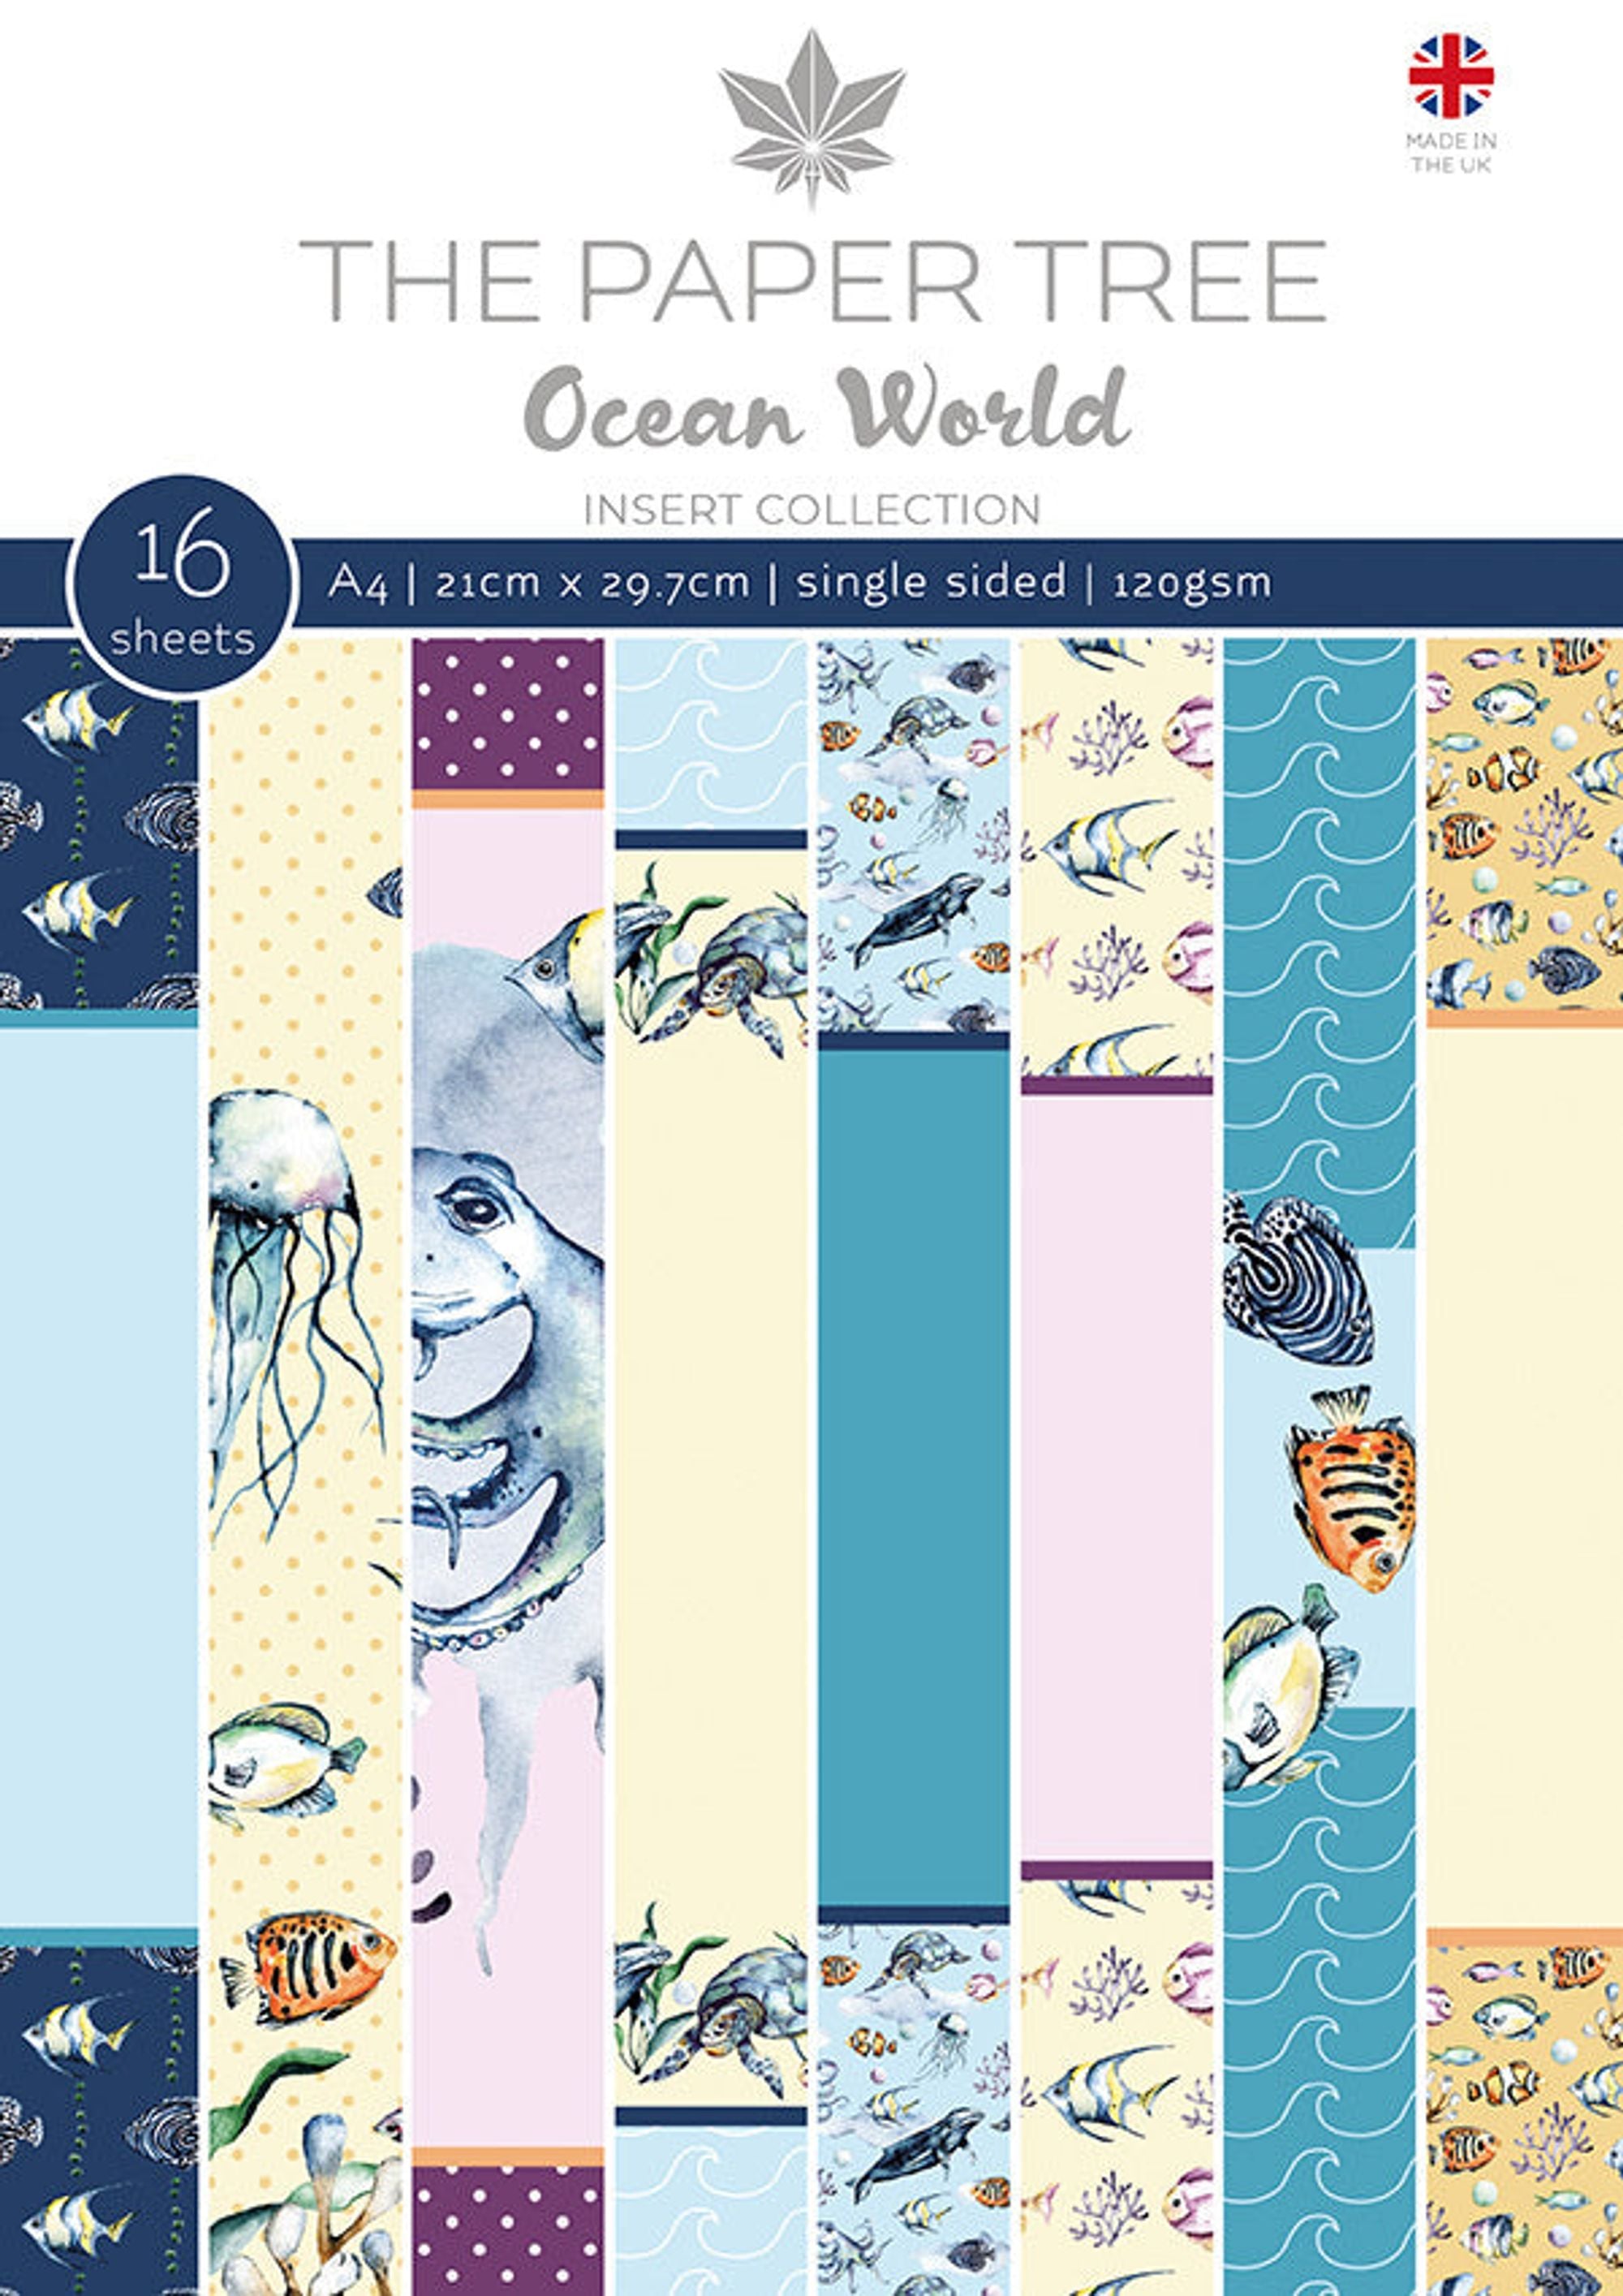 The Paper Tree Ocean World A4 Insert Collection